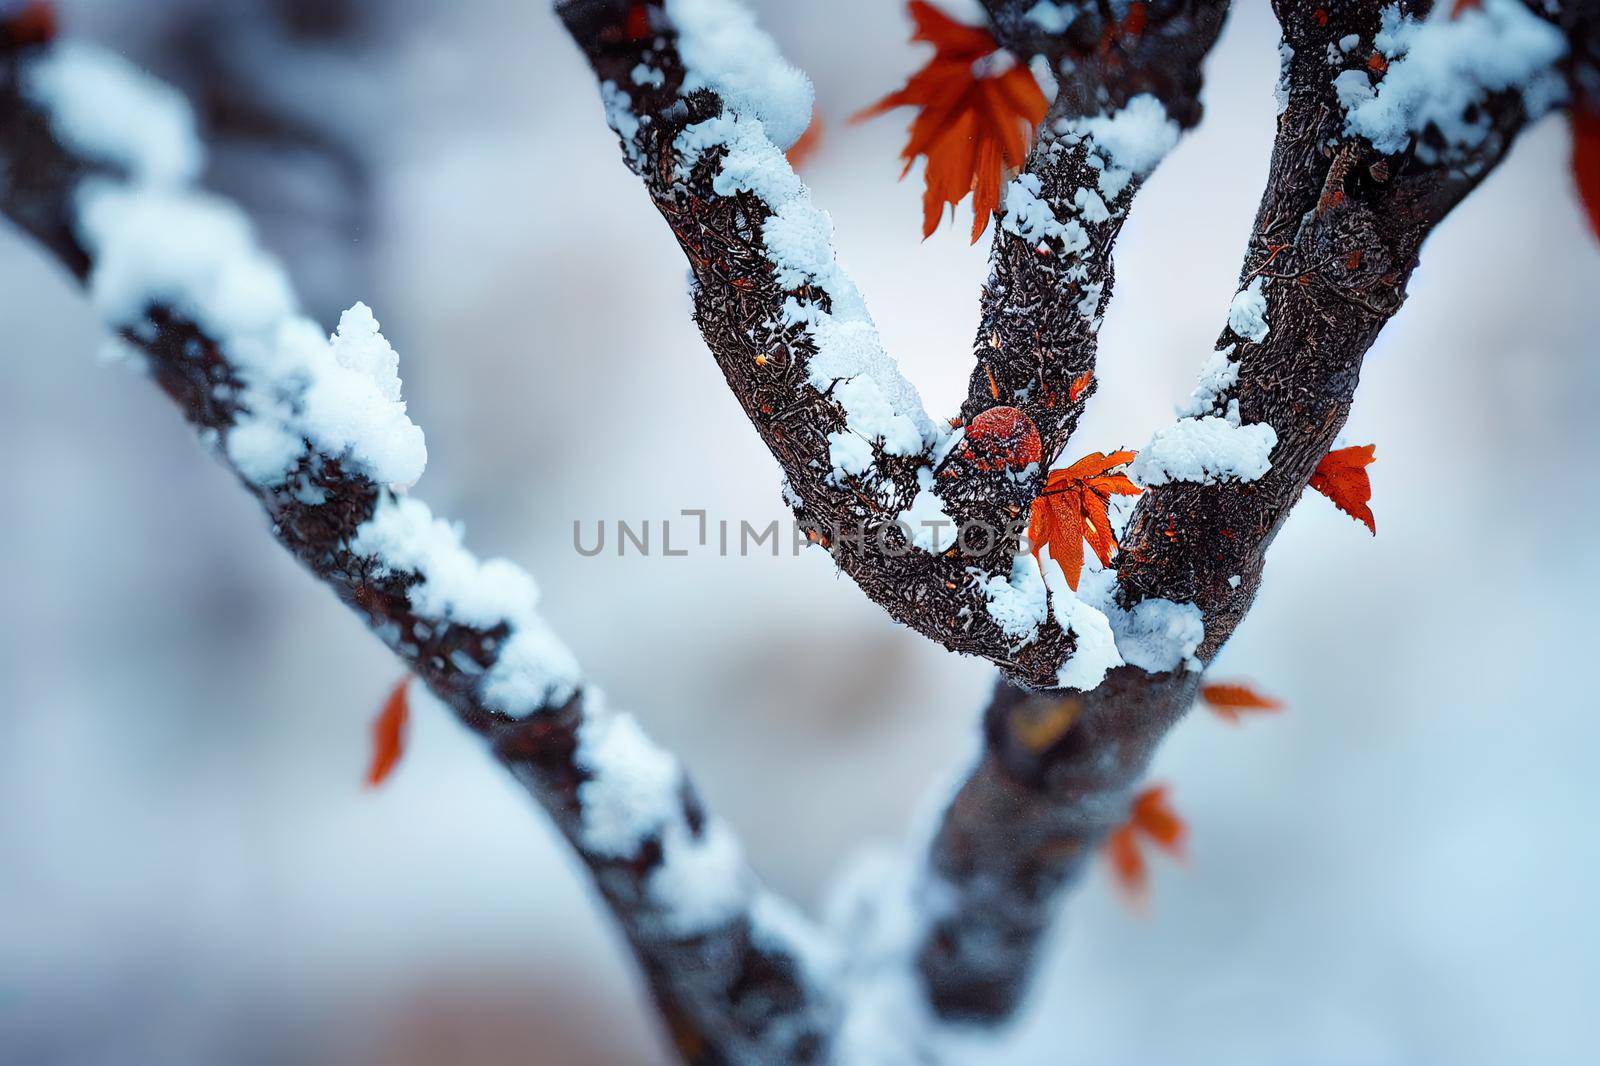 Snow covered alder tree (Alnus glutinosa) branch against defocused background. Selective focus and shallow depth of field.